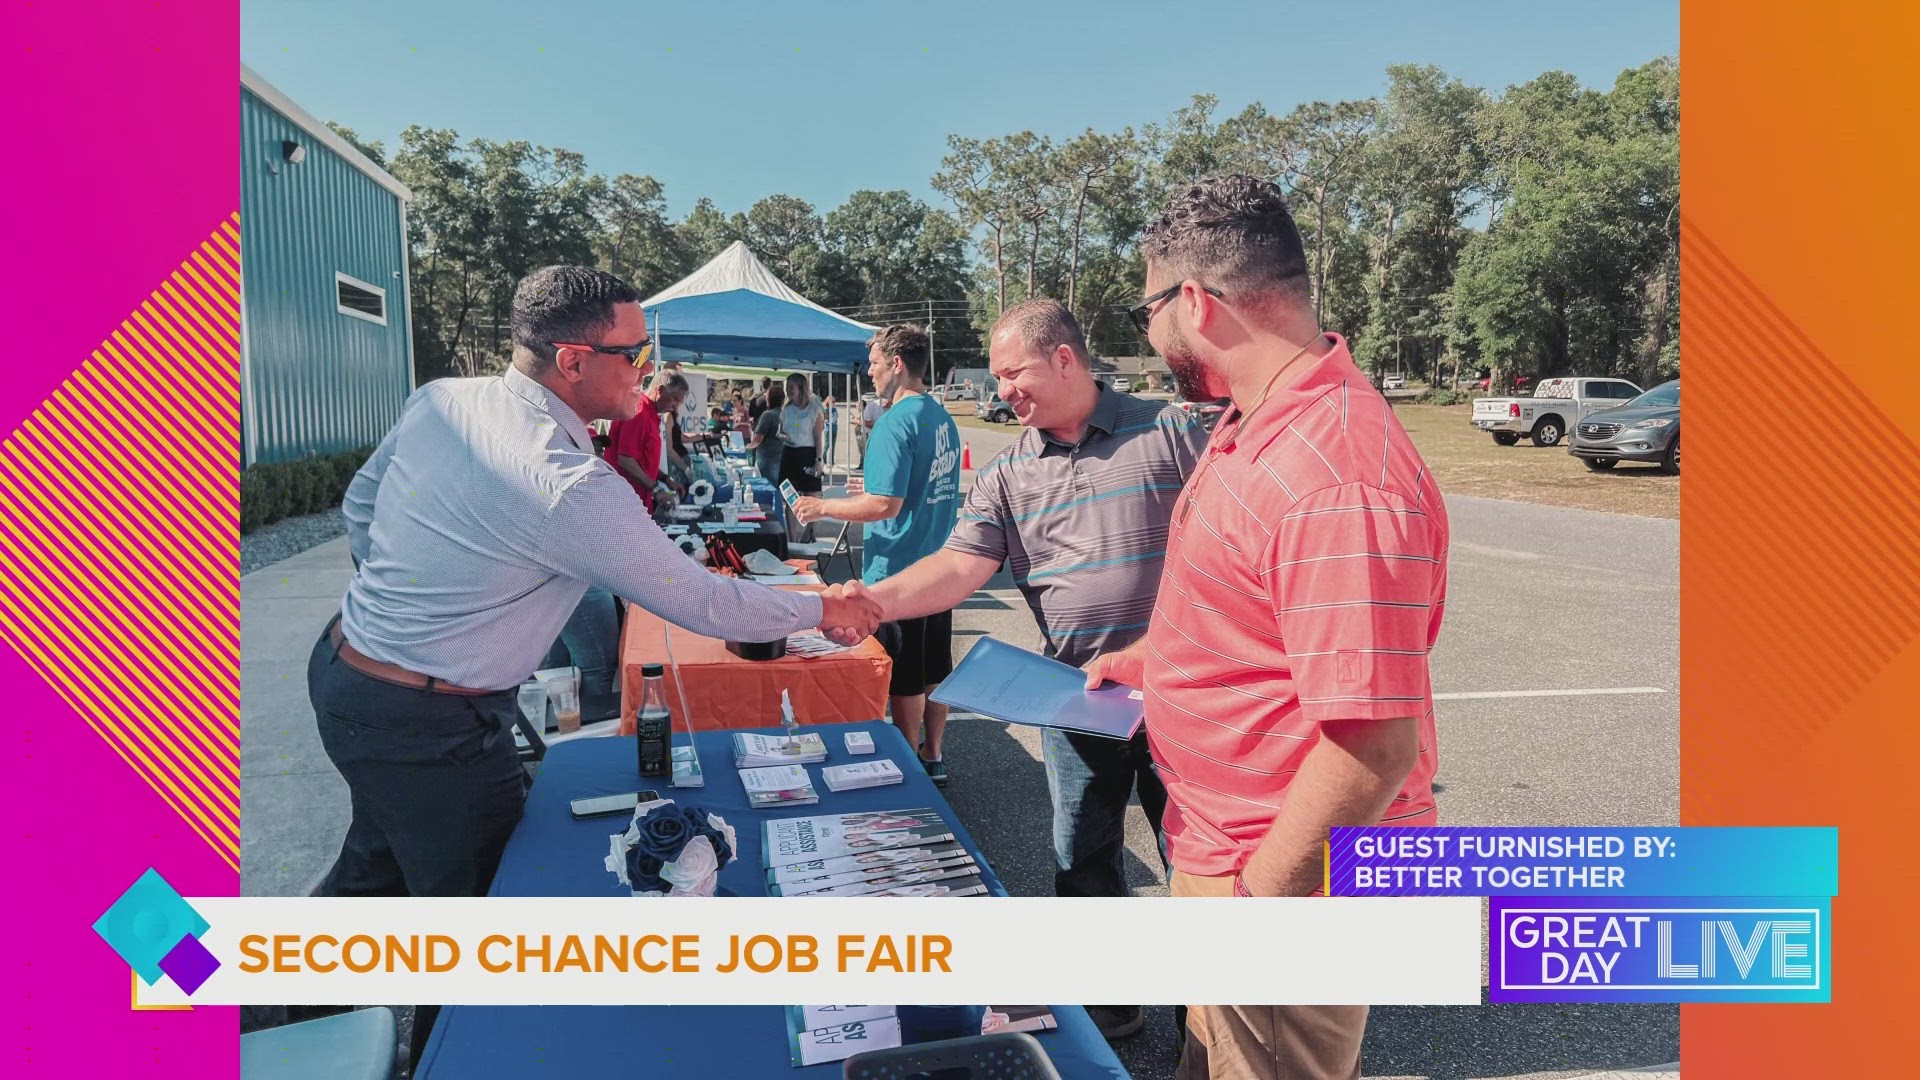 Job seekers facing barriers to employment will have the chance to meet with hiring employers on April 16th and April 18th in Largo and St. Pete.